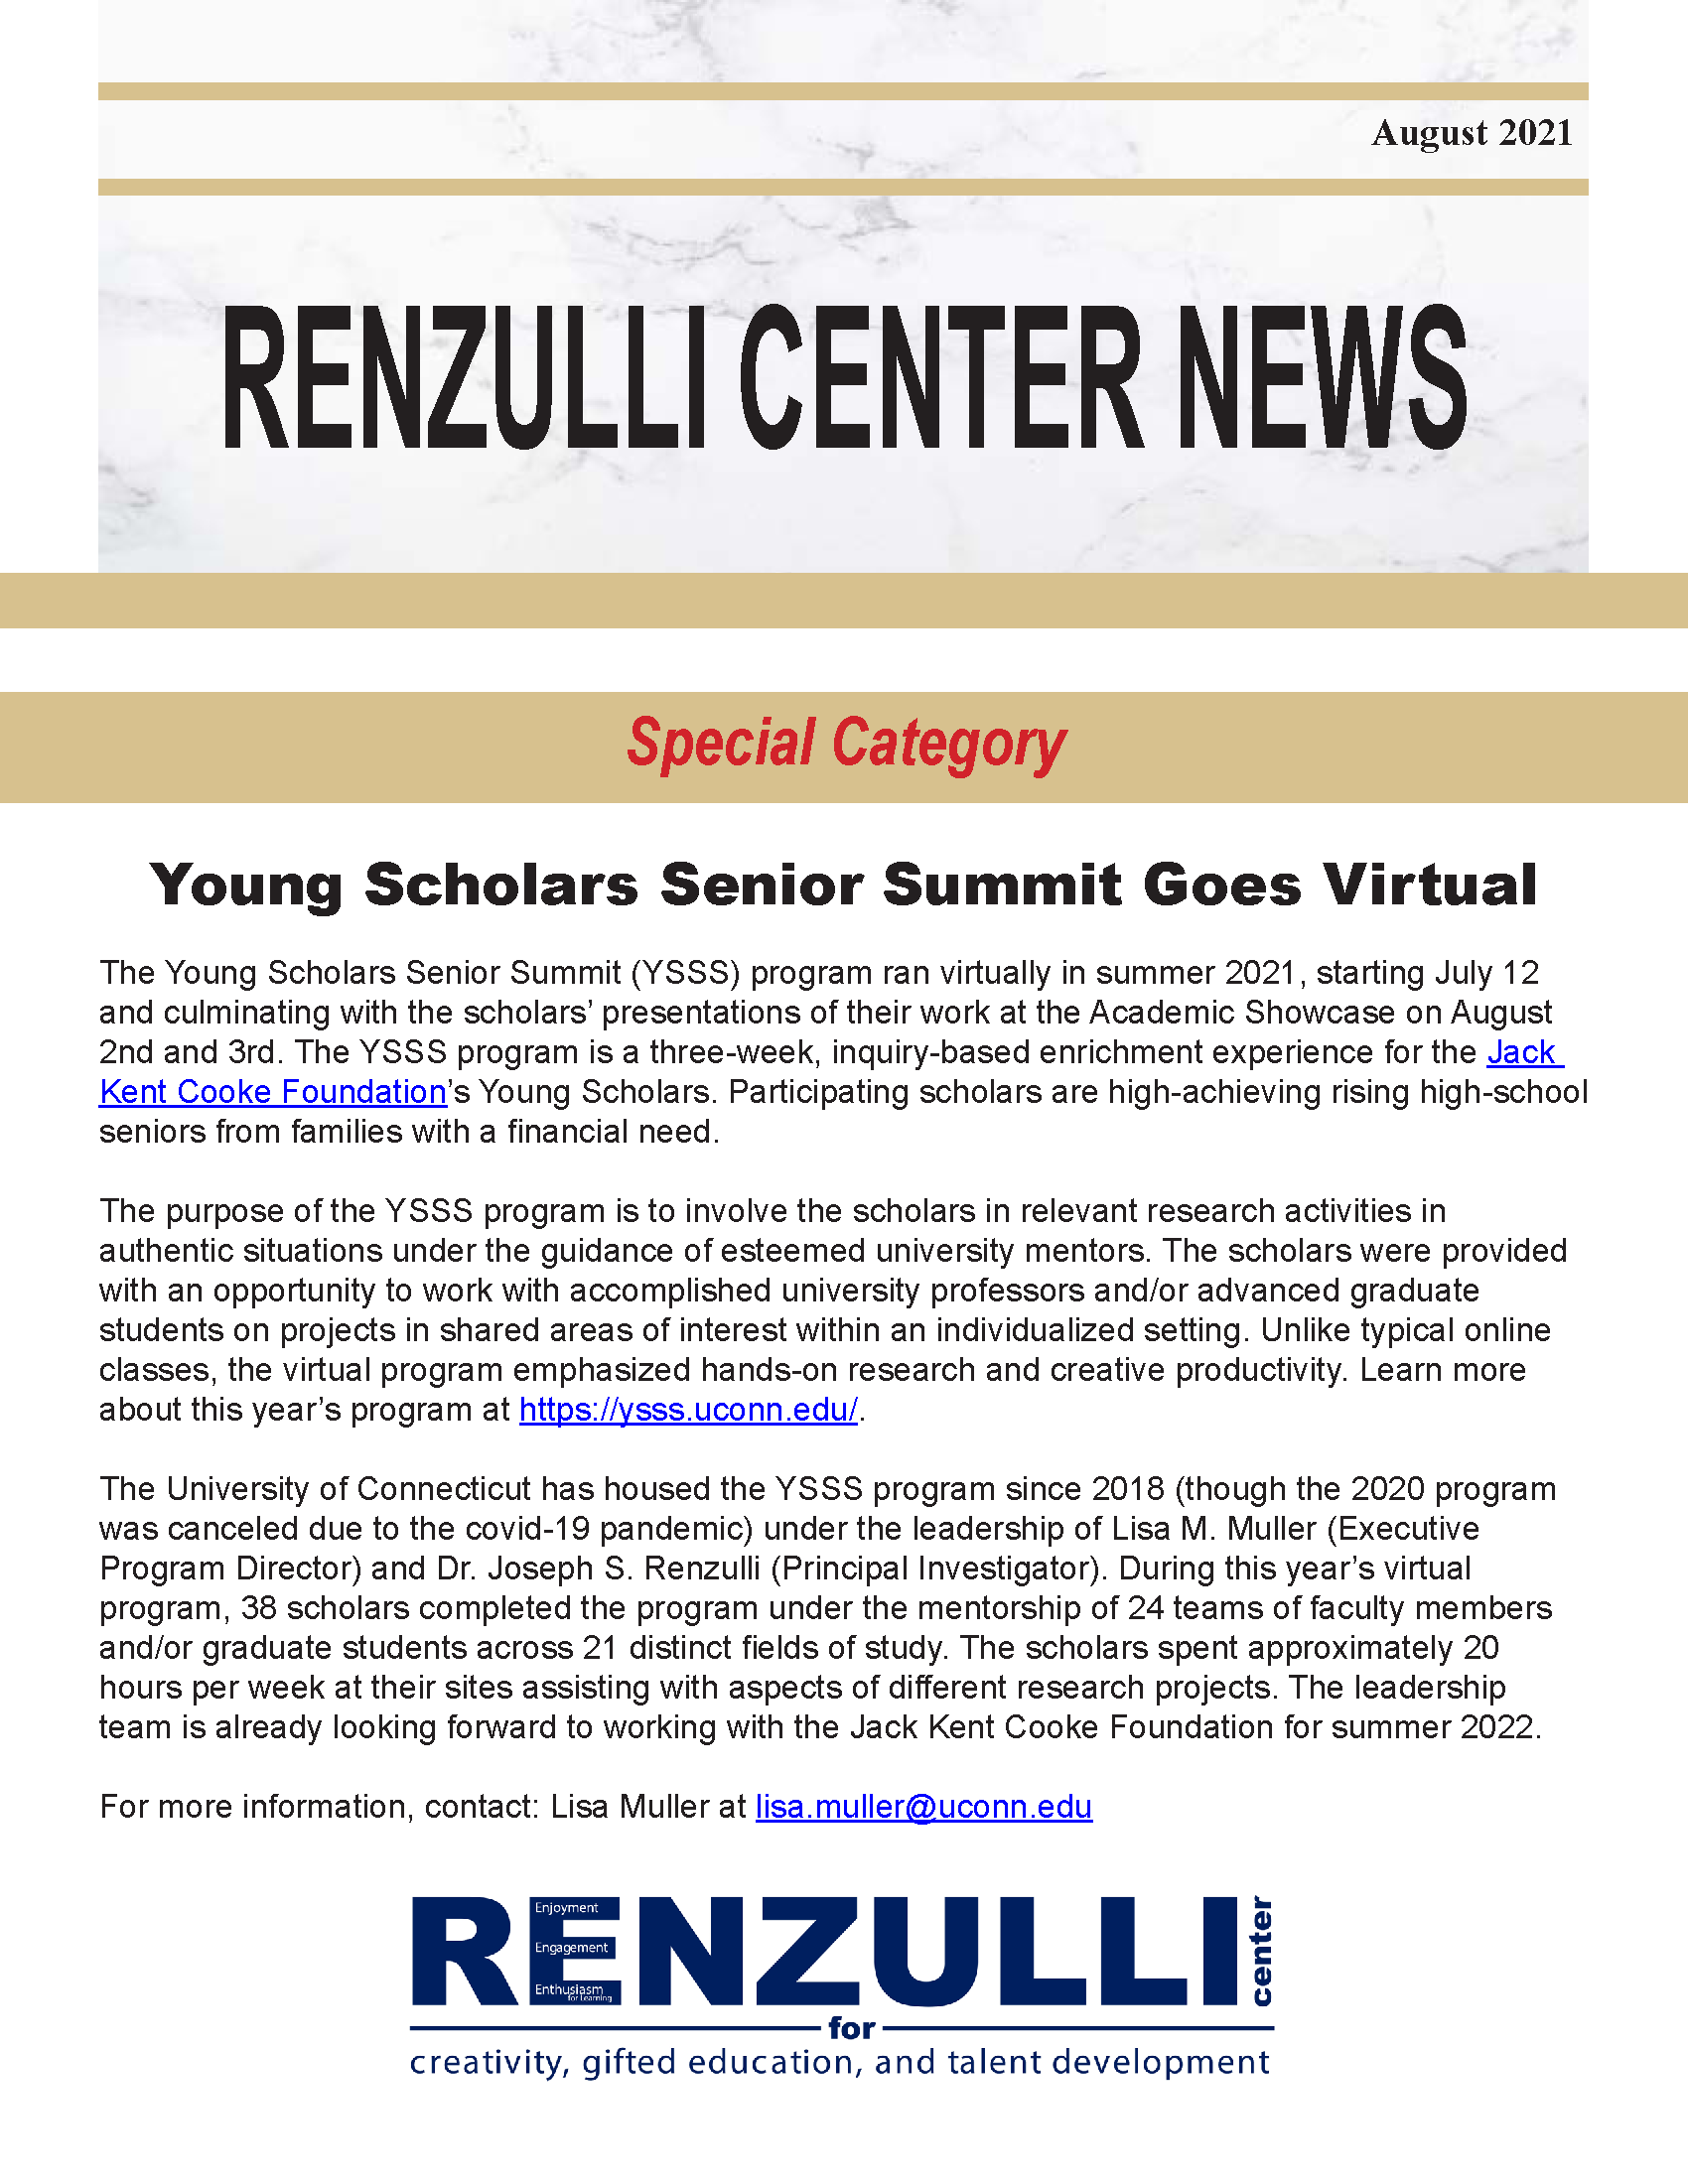 August 2021 Renzulli News Cover Graphic